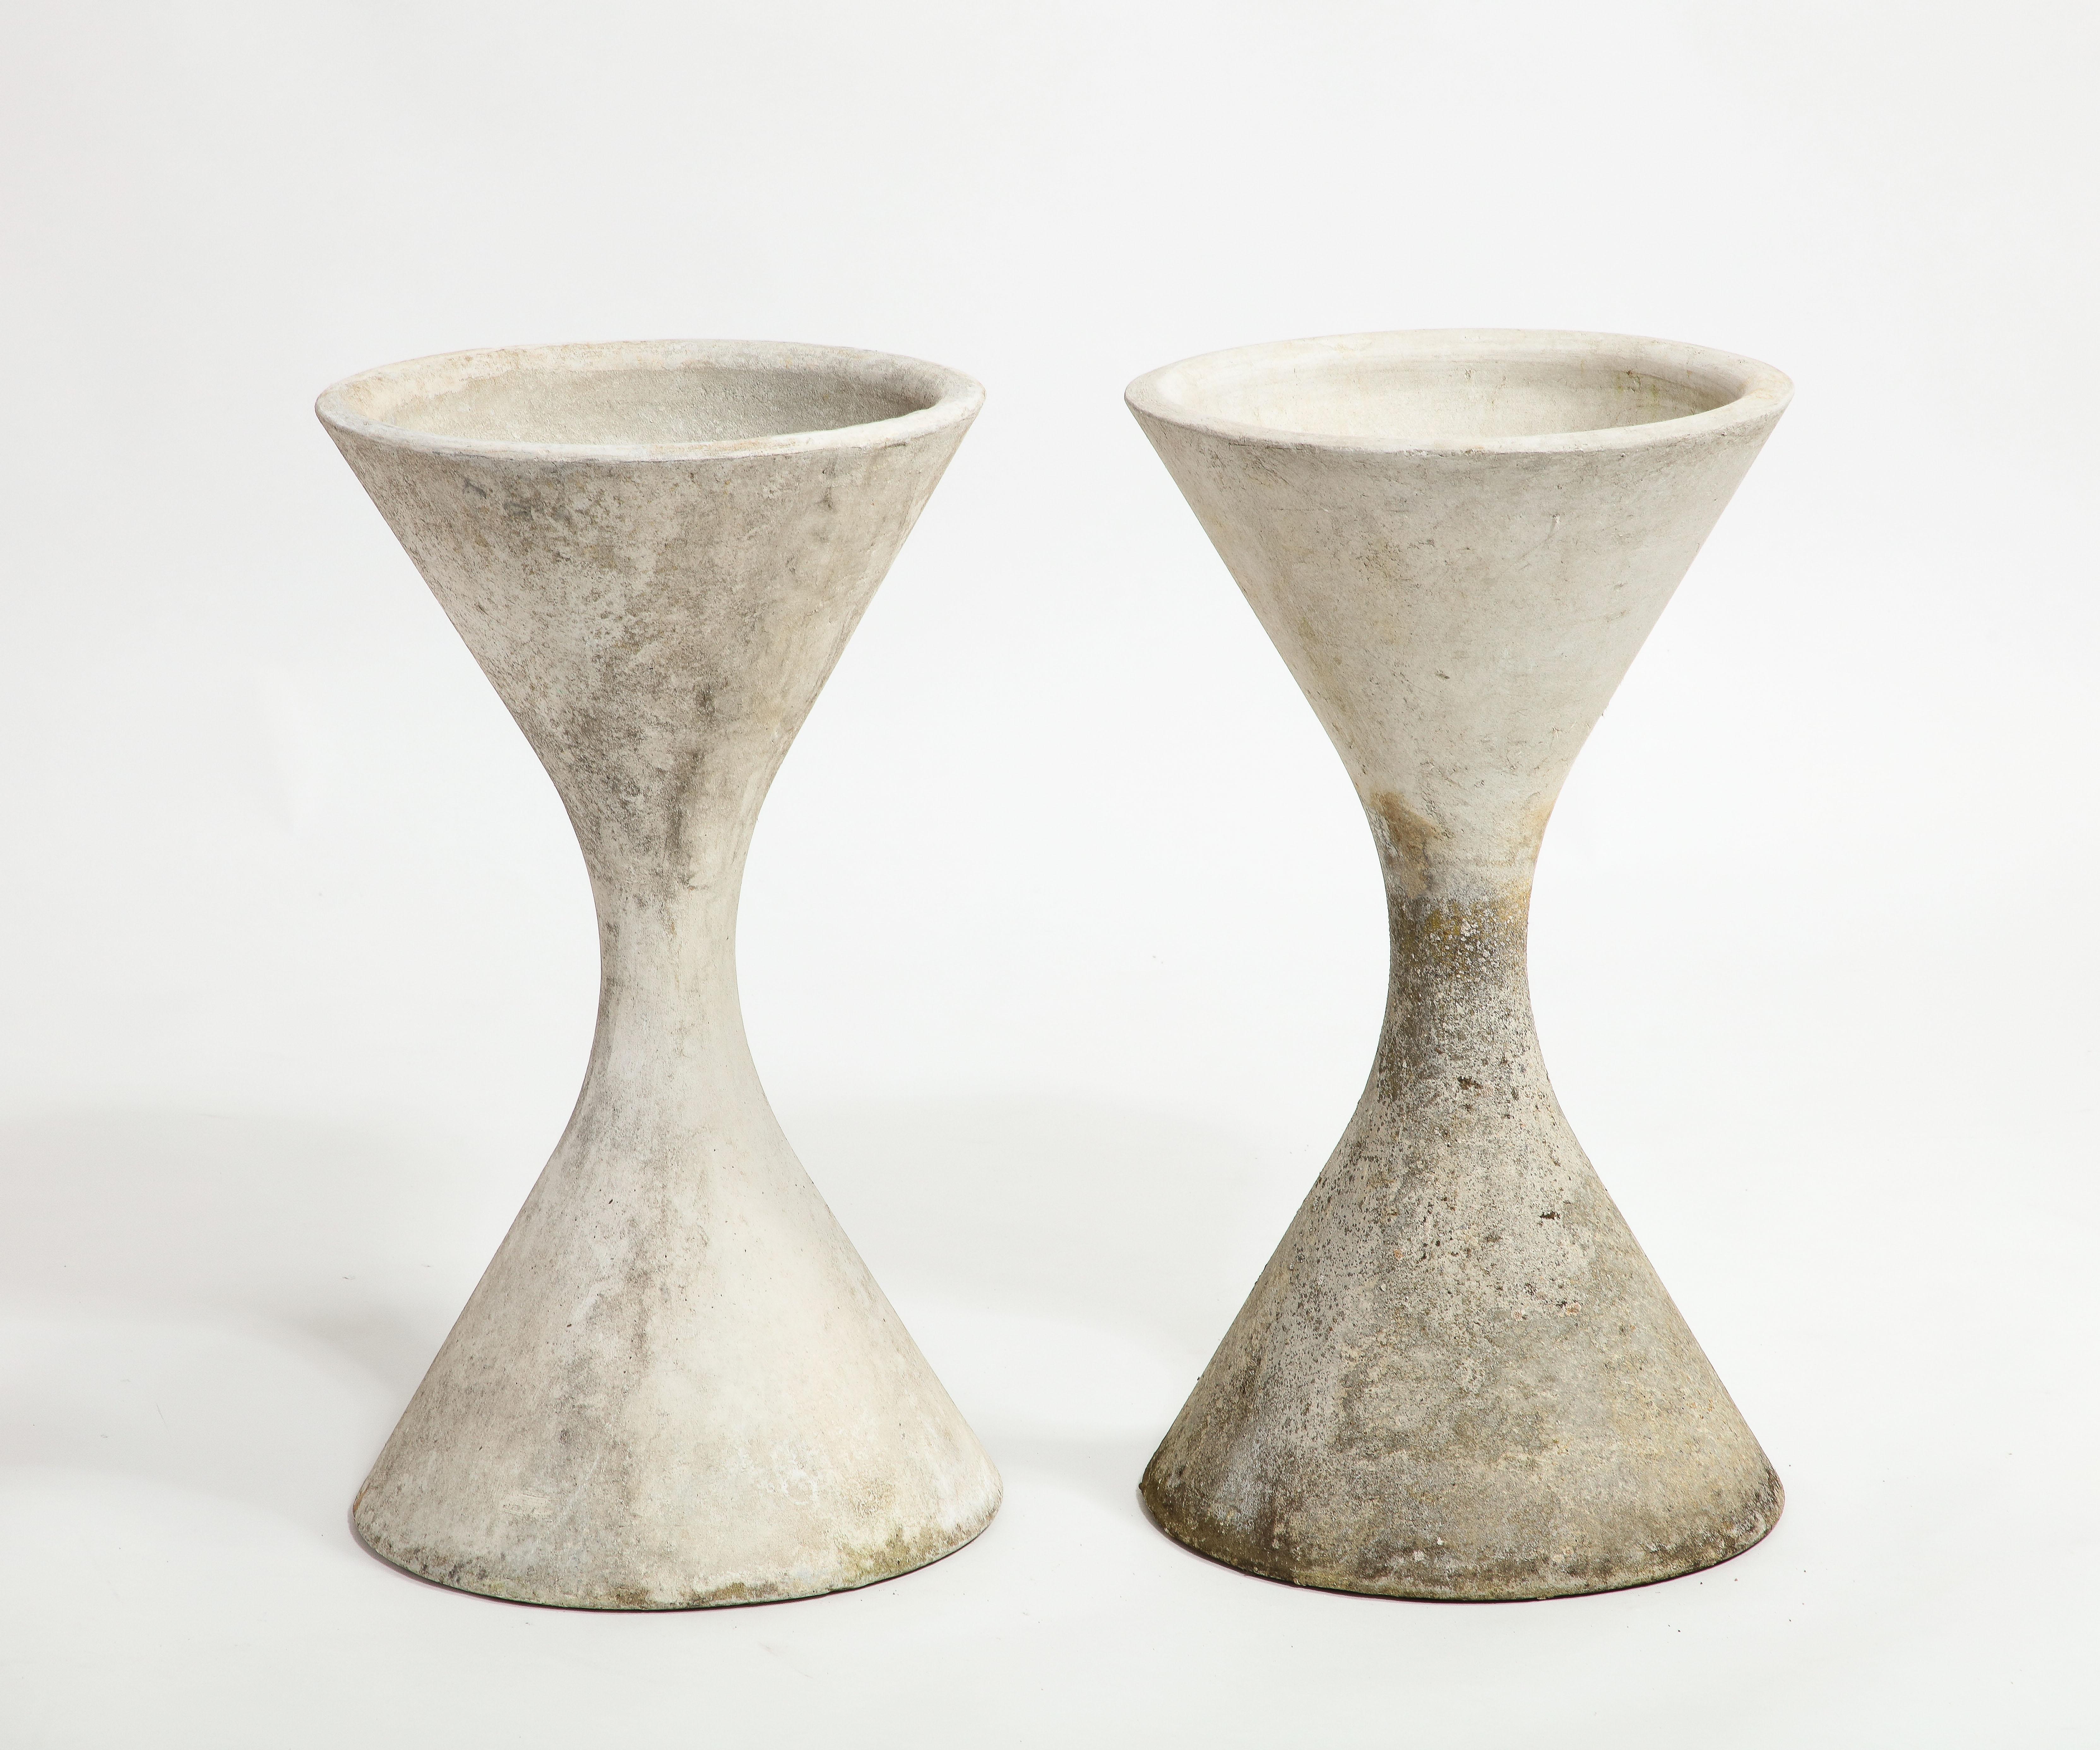 Swiss Willy Guhl for Eternit Medium Concrete Diabolo Spindel Planters, 1960s For Sale